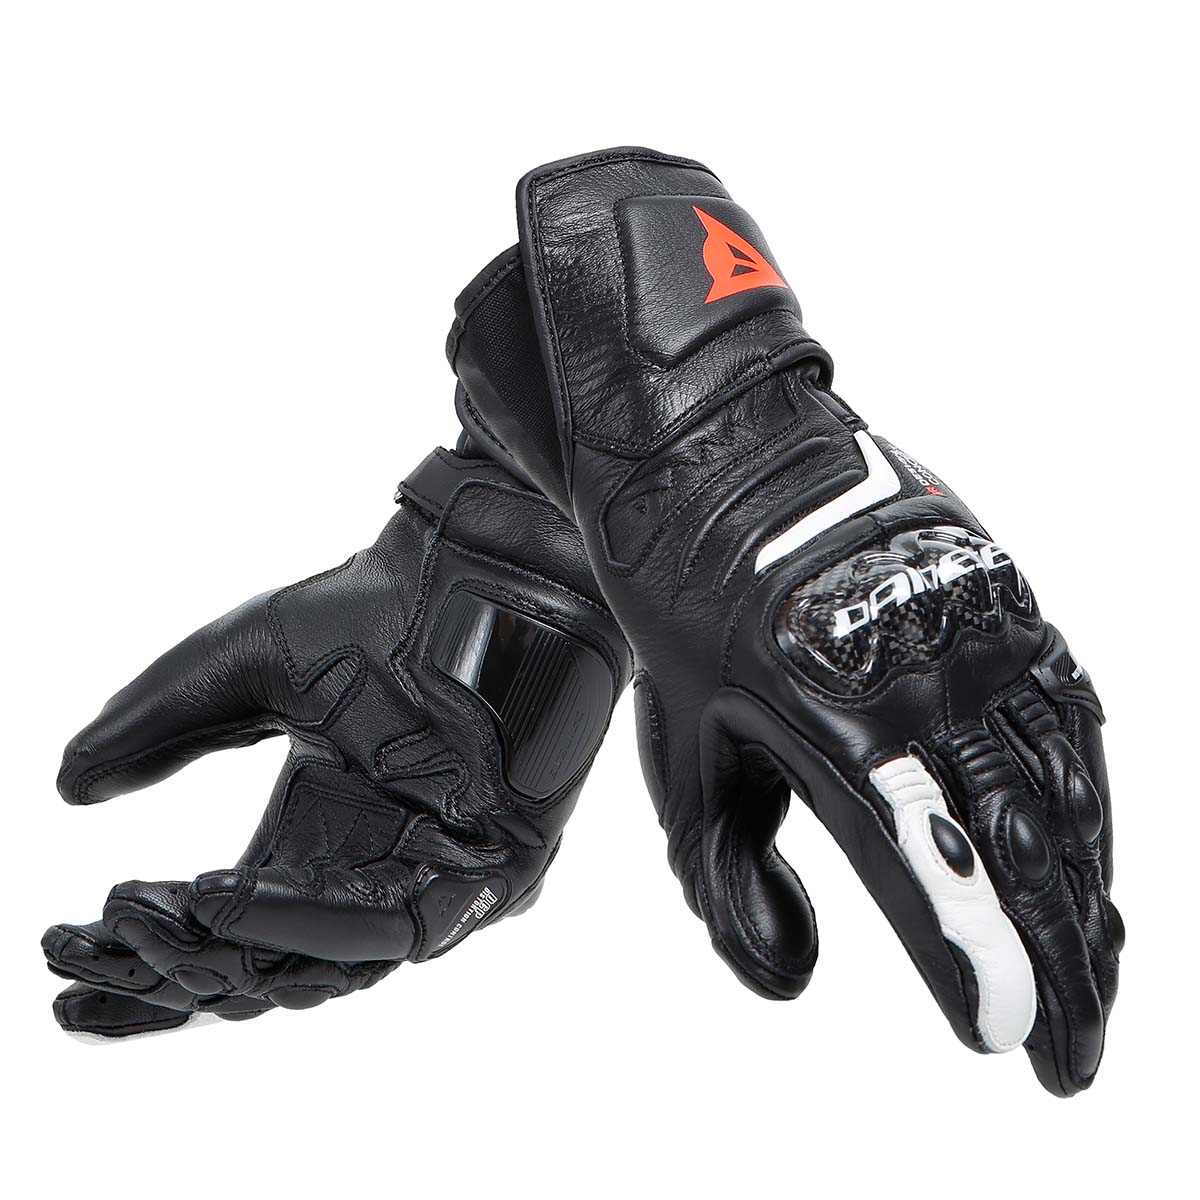 CARBON 4 LONG LADY LEATHER GLOVES